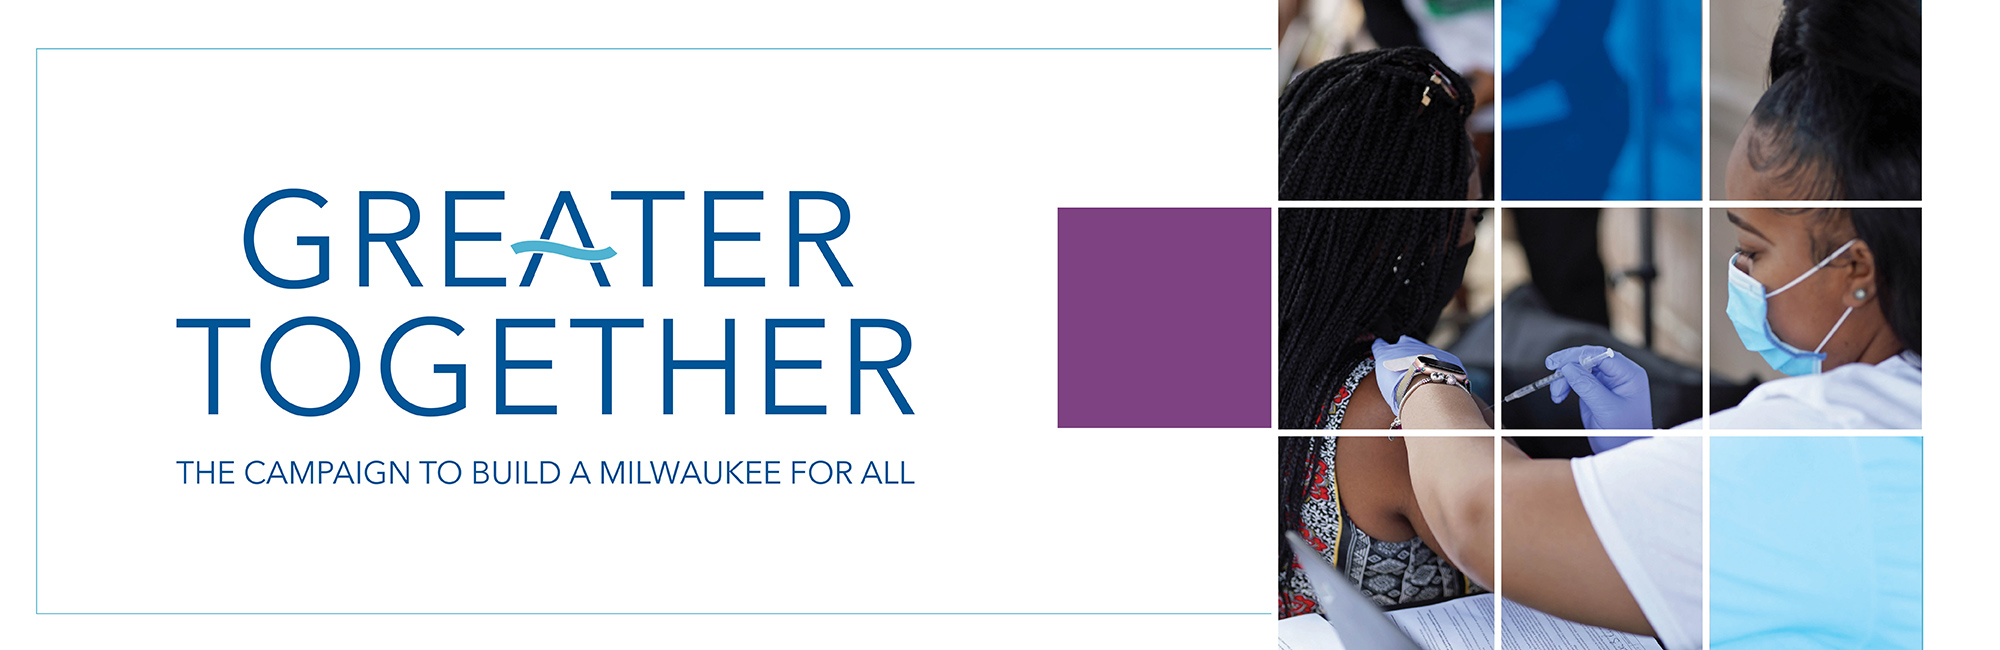 Greater Together Campaign banner featuring flexible funds